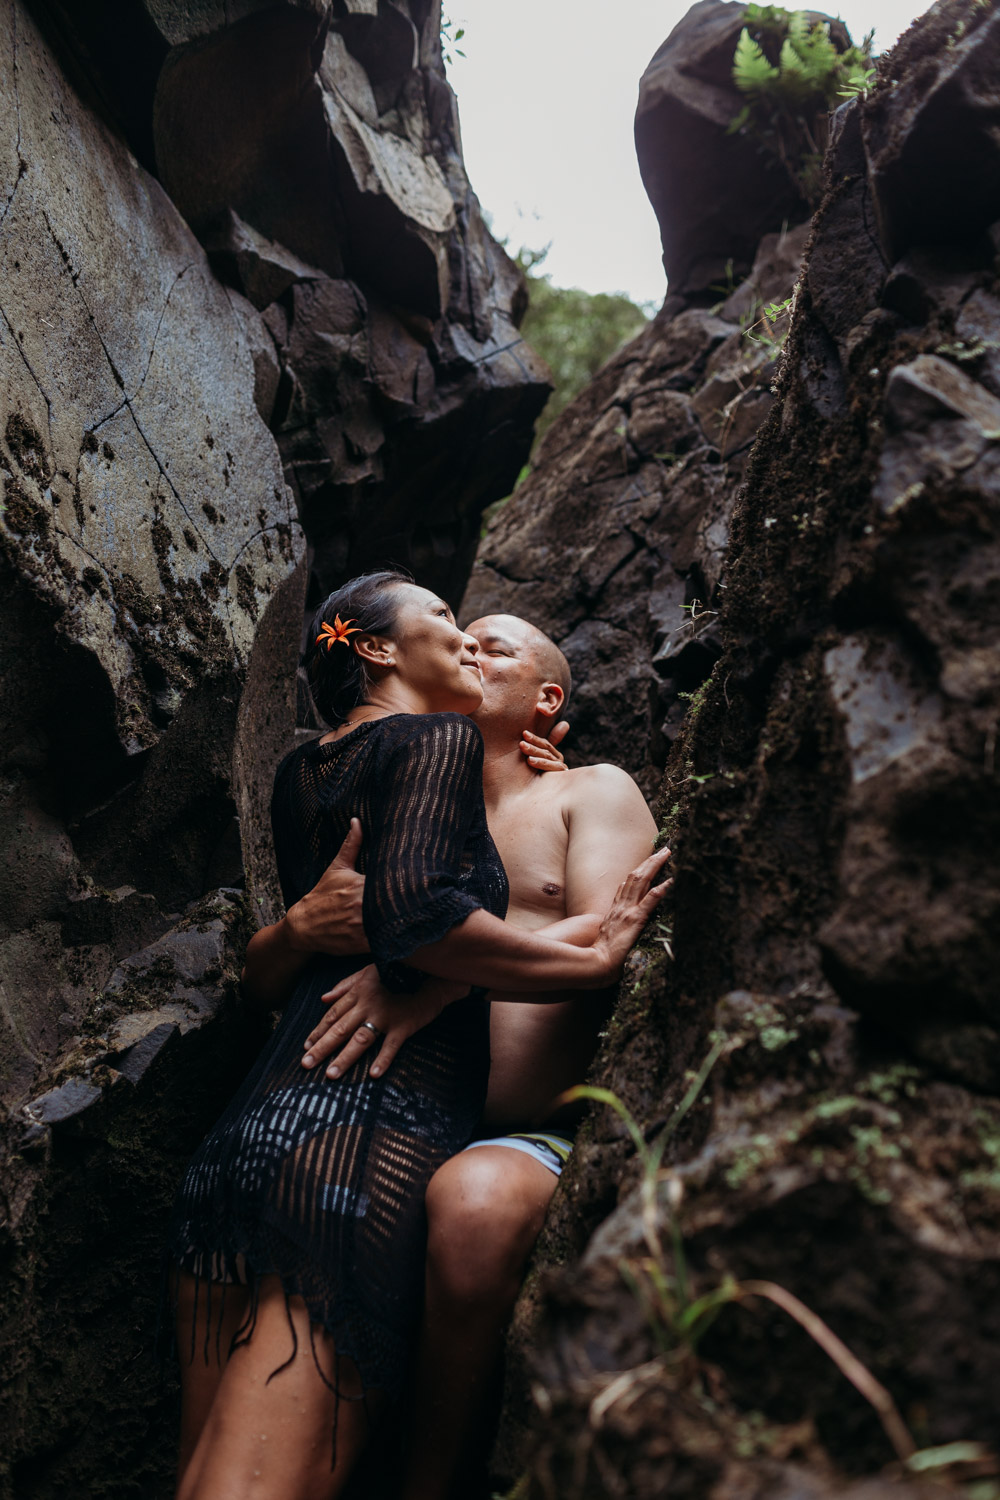 Couple embraces as he kisses her cheek leaned up against rocks during their Kauai engagement photoshoot by Liz Koston.